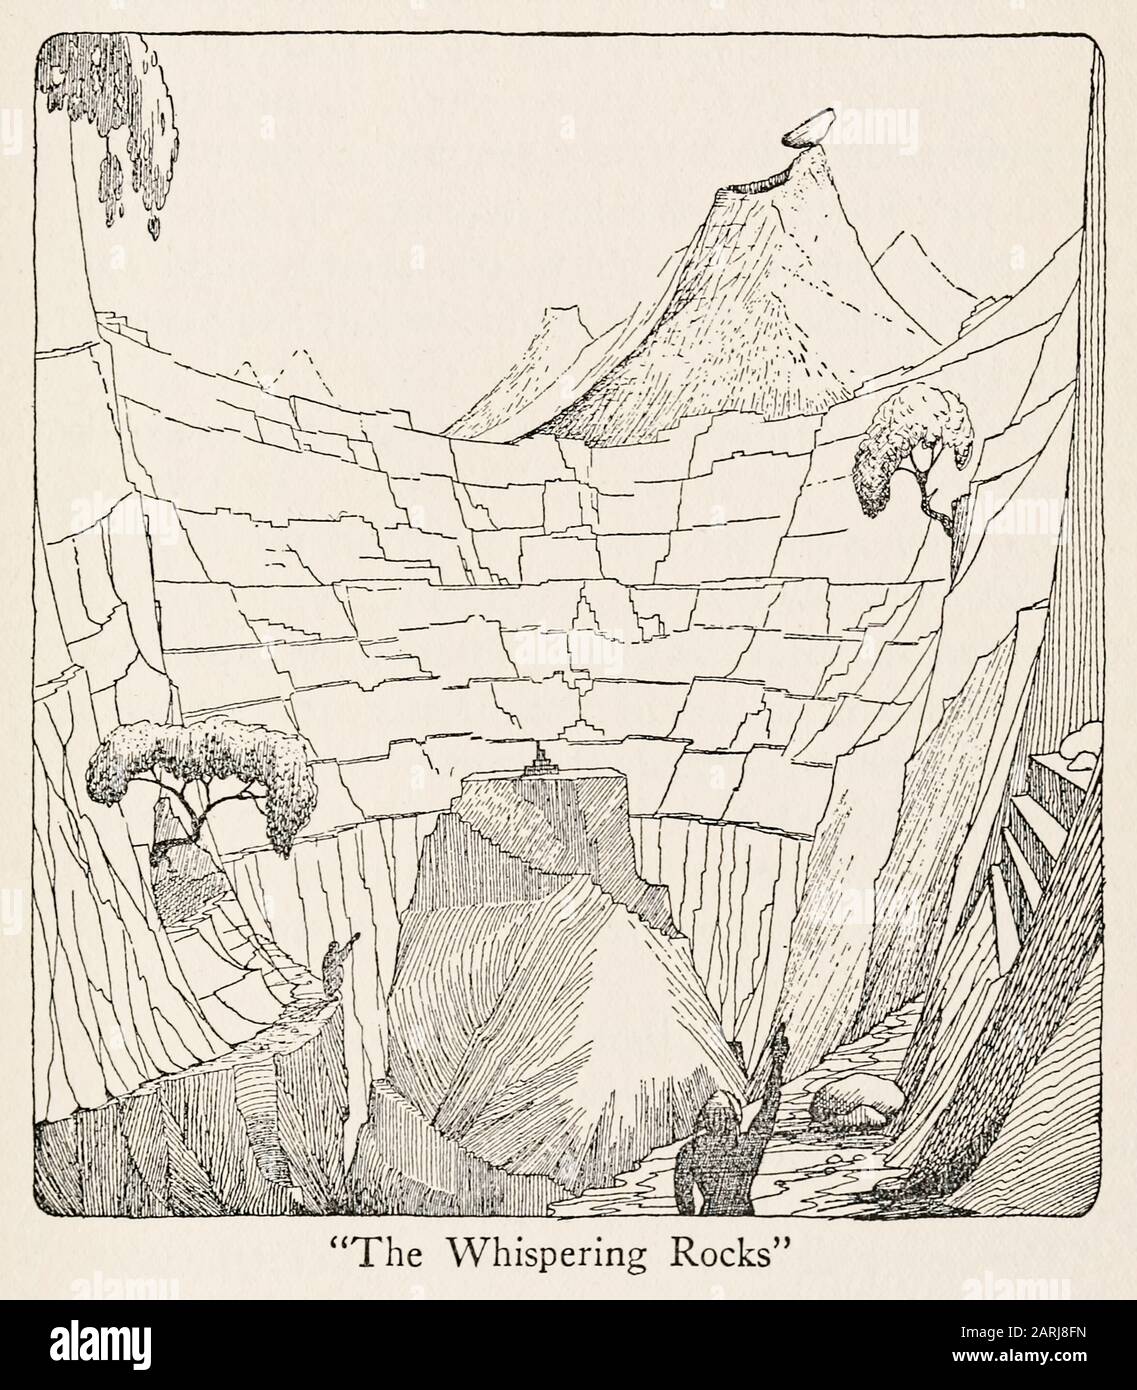 “The Whispering Rocks” illustration from The Voyages of Doctor Dolittle (1922) written and illustrated by Hugh Lofting (1886-1947). The second novel about a Doctor who can talk to animals. See more information below. Stock Photo